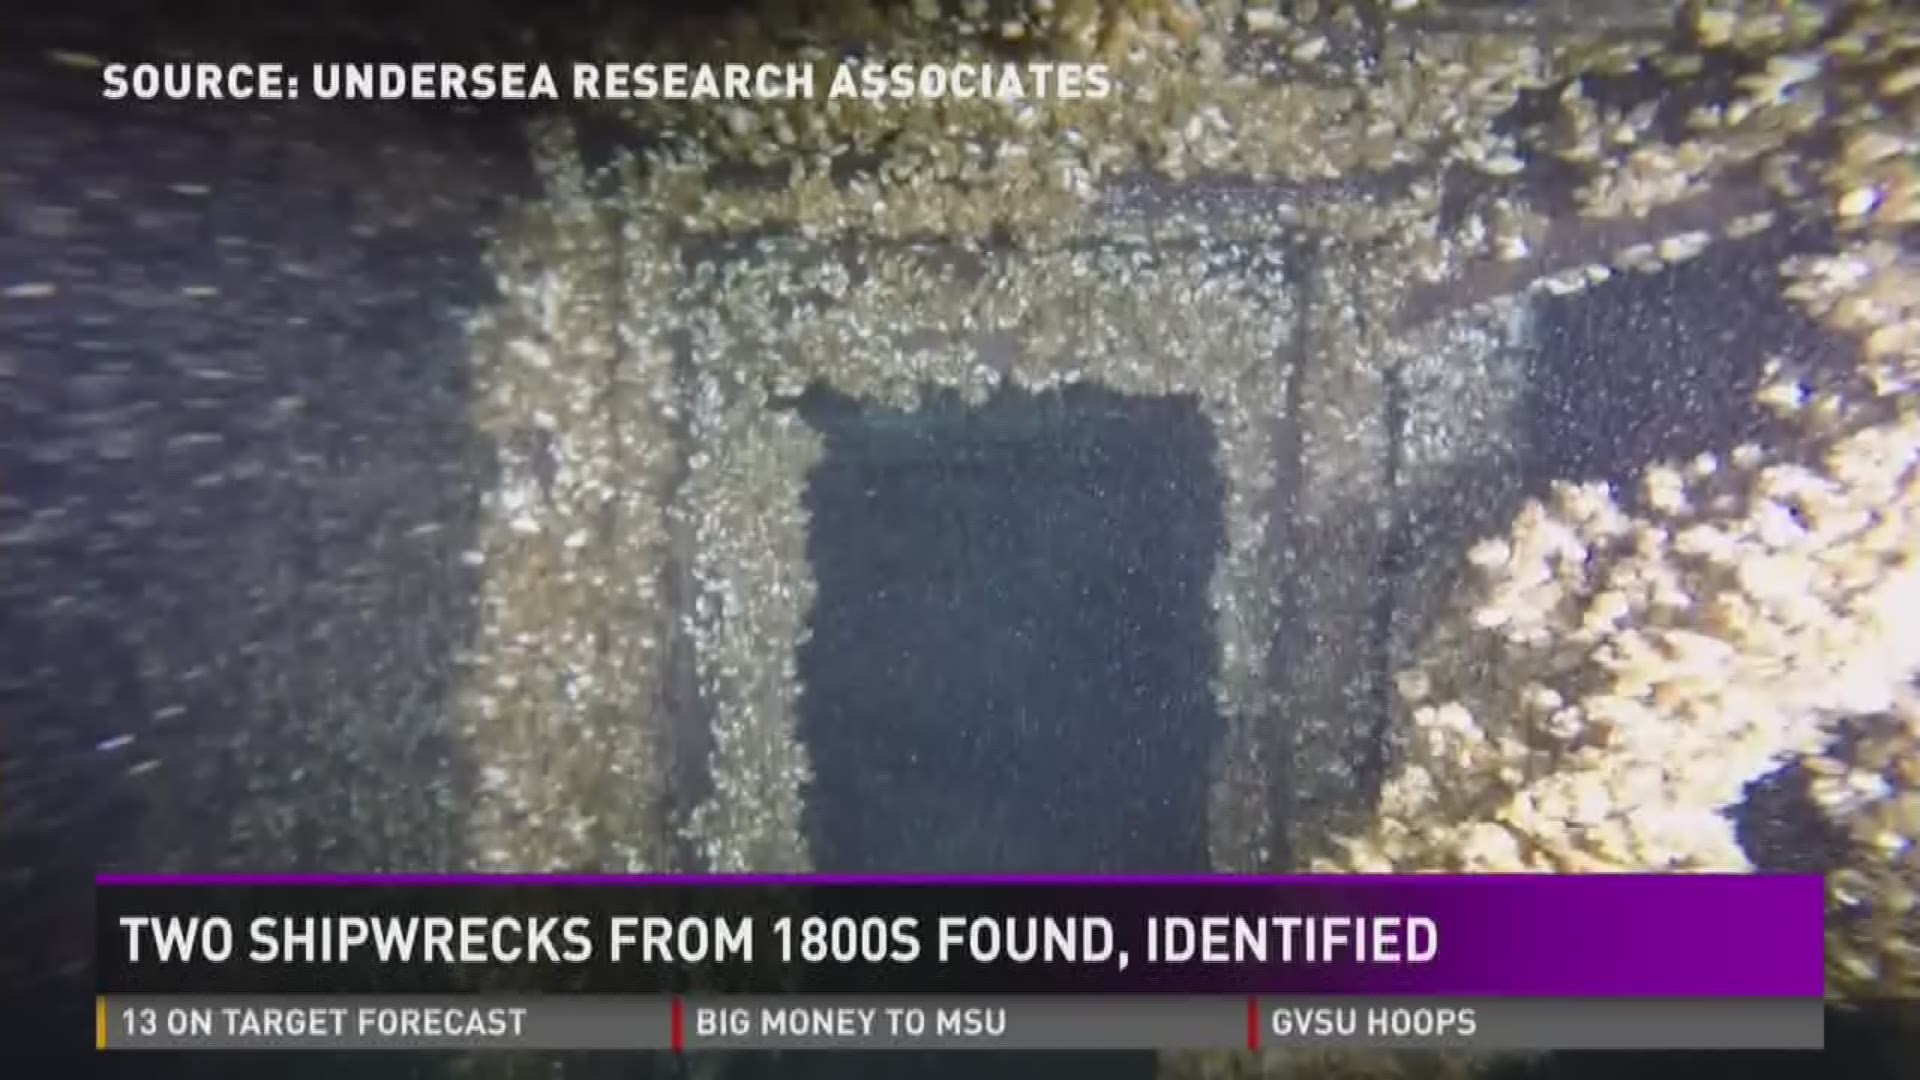 Michigan's renowned shipwreck discoverer, David Trotter has chosen WZZM 13 as the media outlet to reveal his recent discoveries -- two schooners that sank in Lake Huron back in the 1800s.